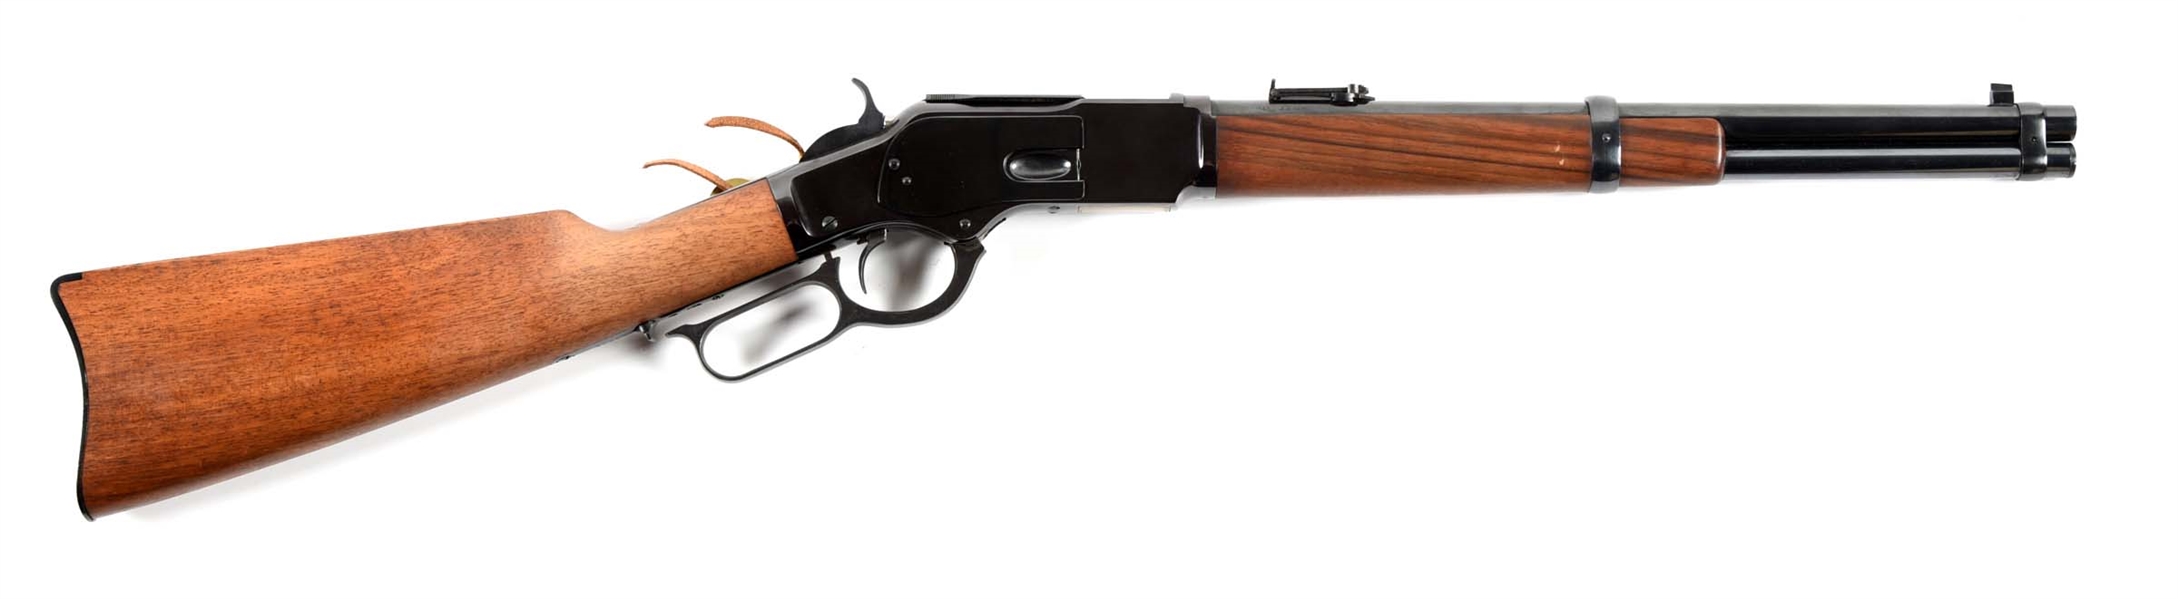 (M) NAVY ARMS MODEL 73 SADDLE RING TRAPPER CARBINE IN .44-40.